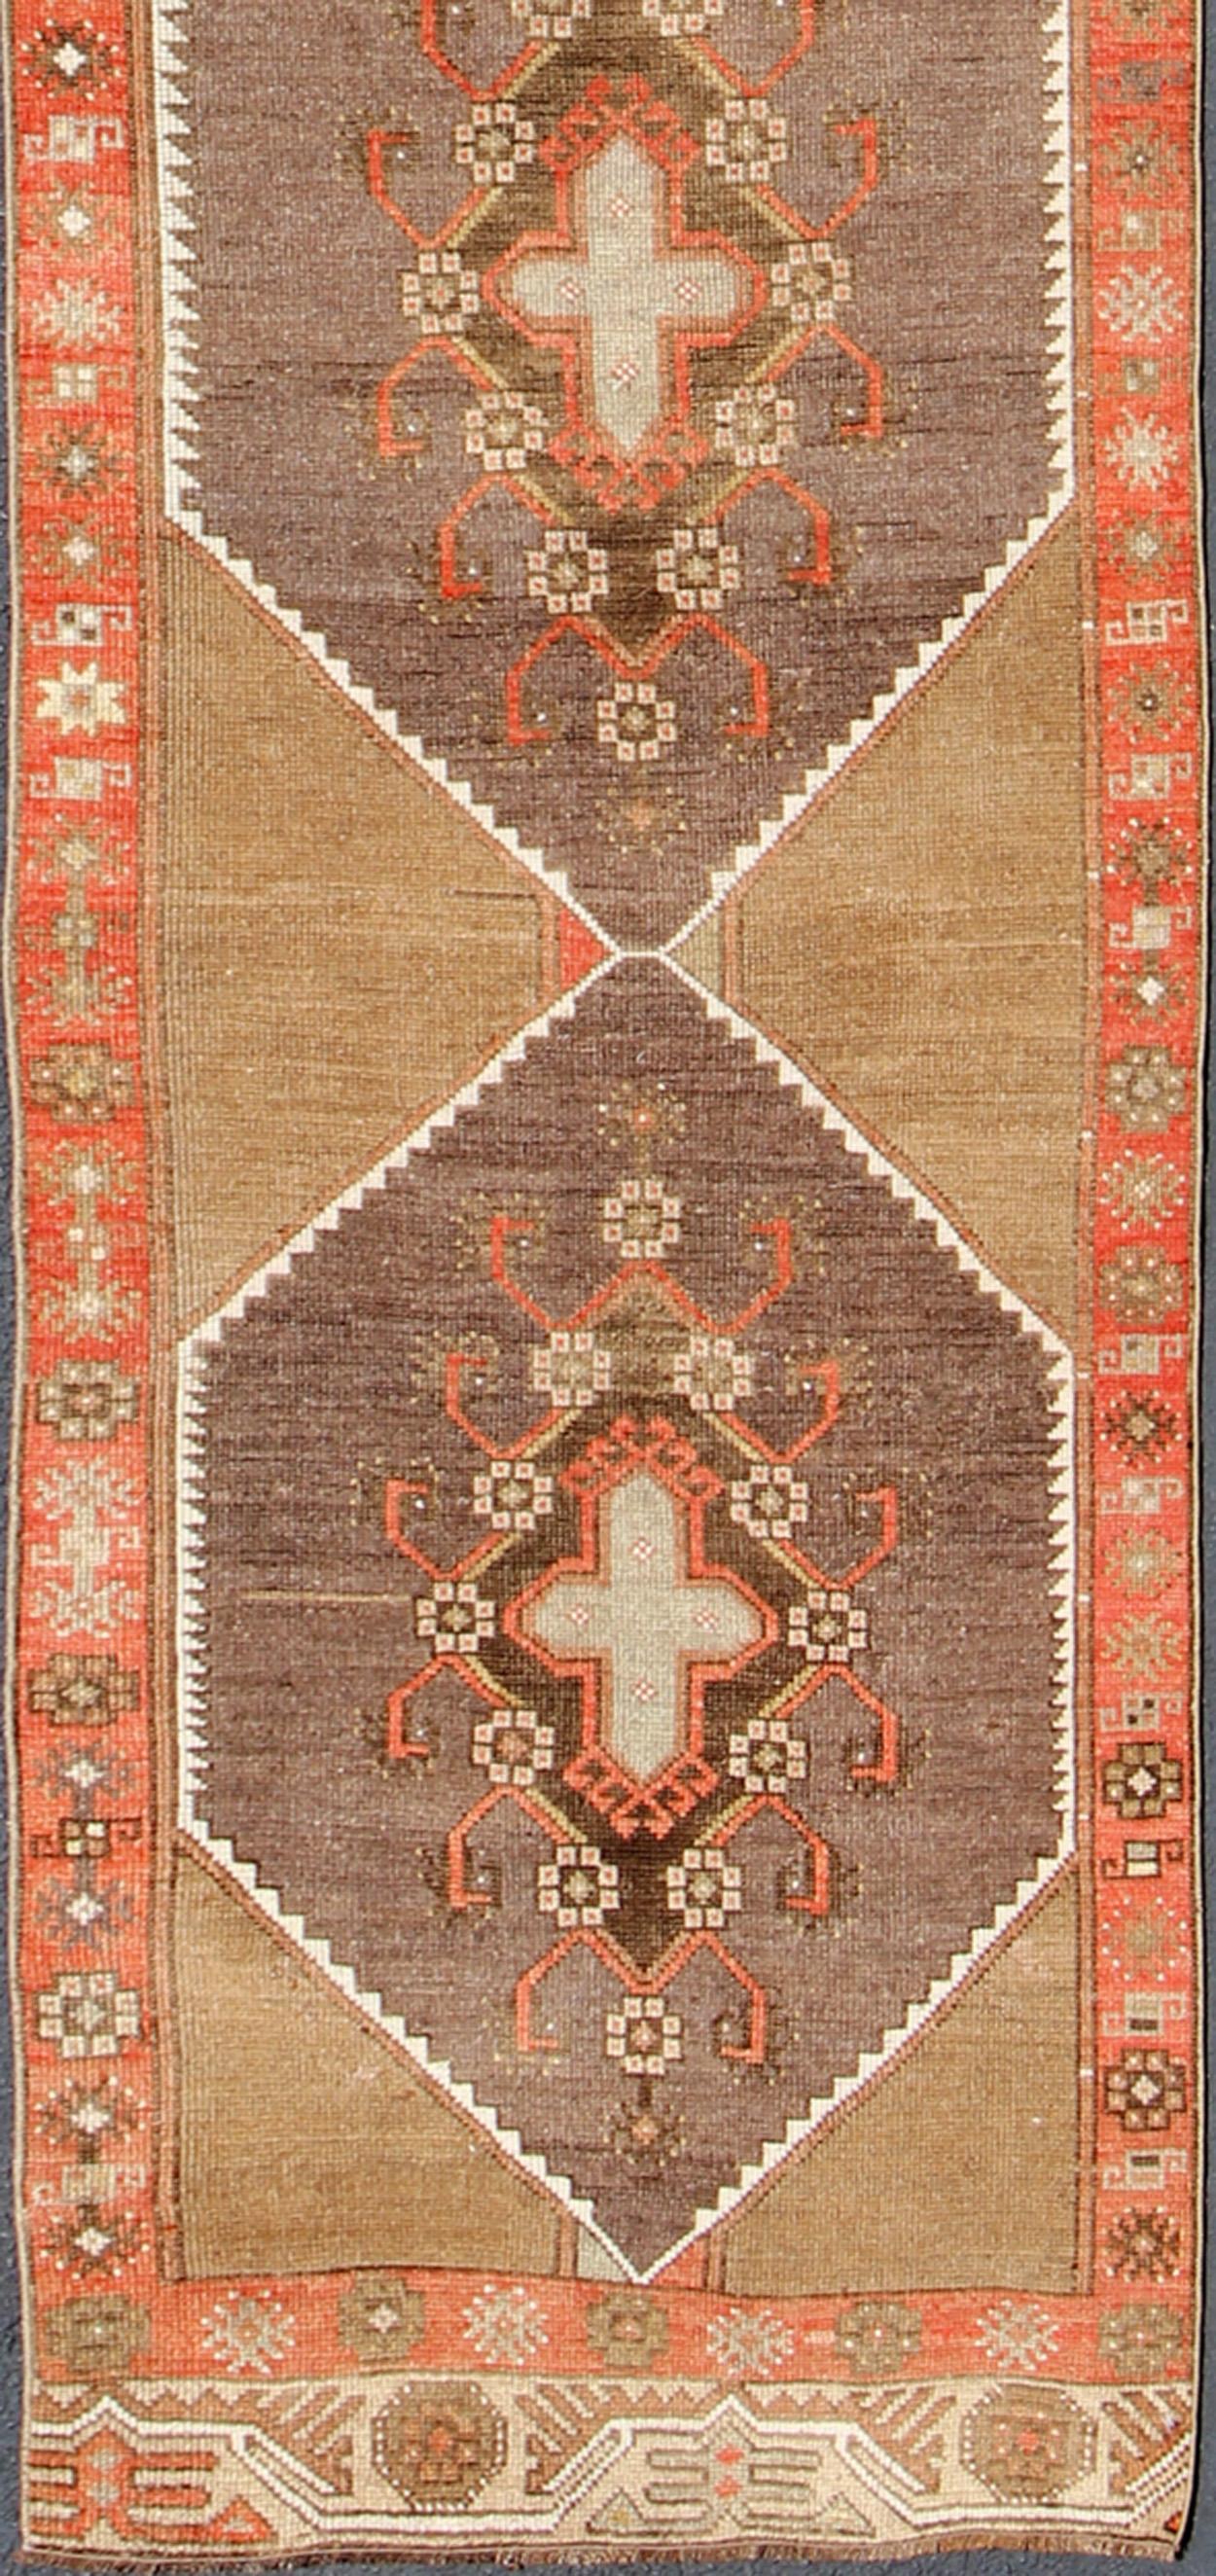 Long and narrow vintage runner from Turkey with multi geometric diamond medallion design in camel background, rust, gray, orange, brown and taupe. rug/TU-UGU-4808, country of origin / type: Turkey / Oushak, circa 1930

This vintage Turkish Oushak